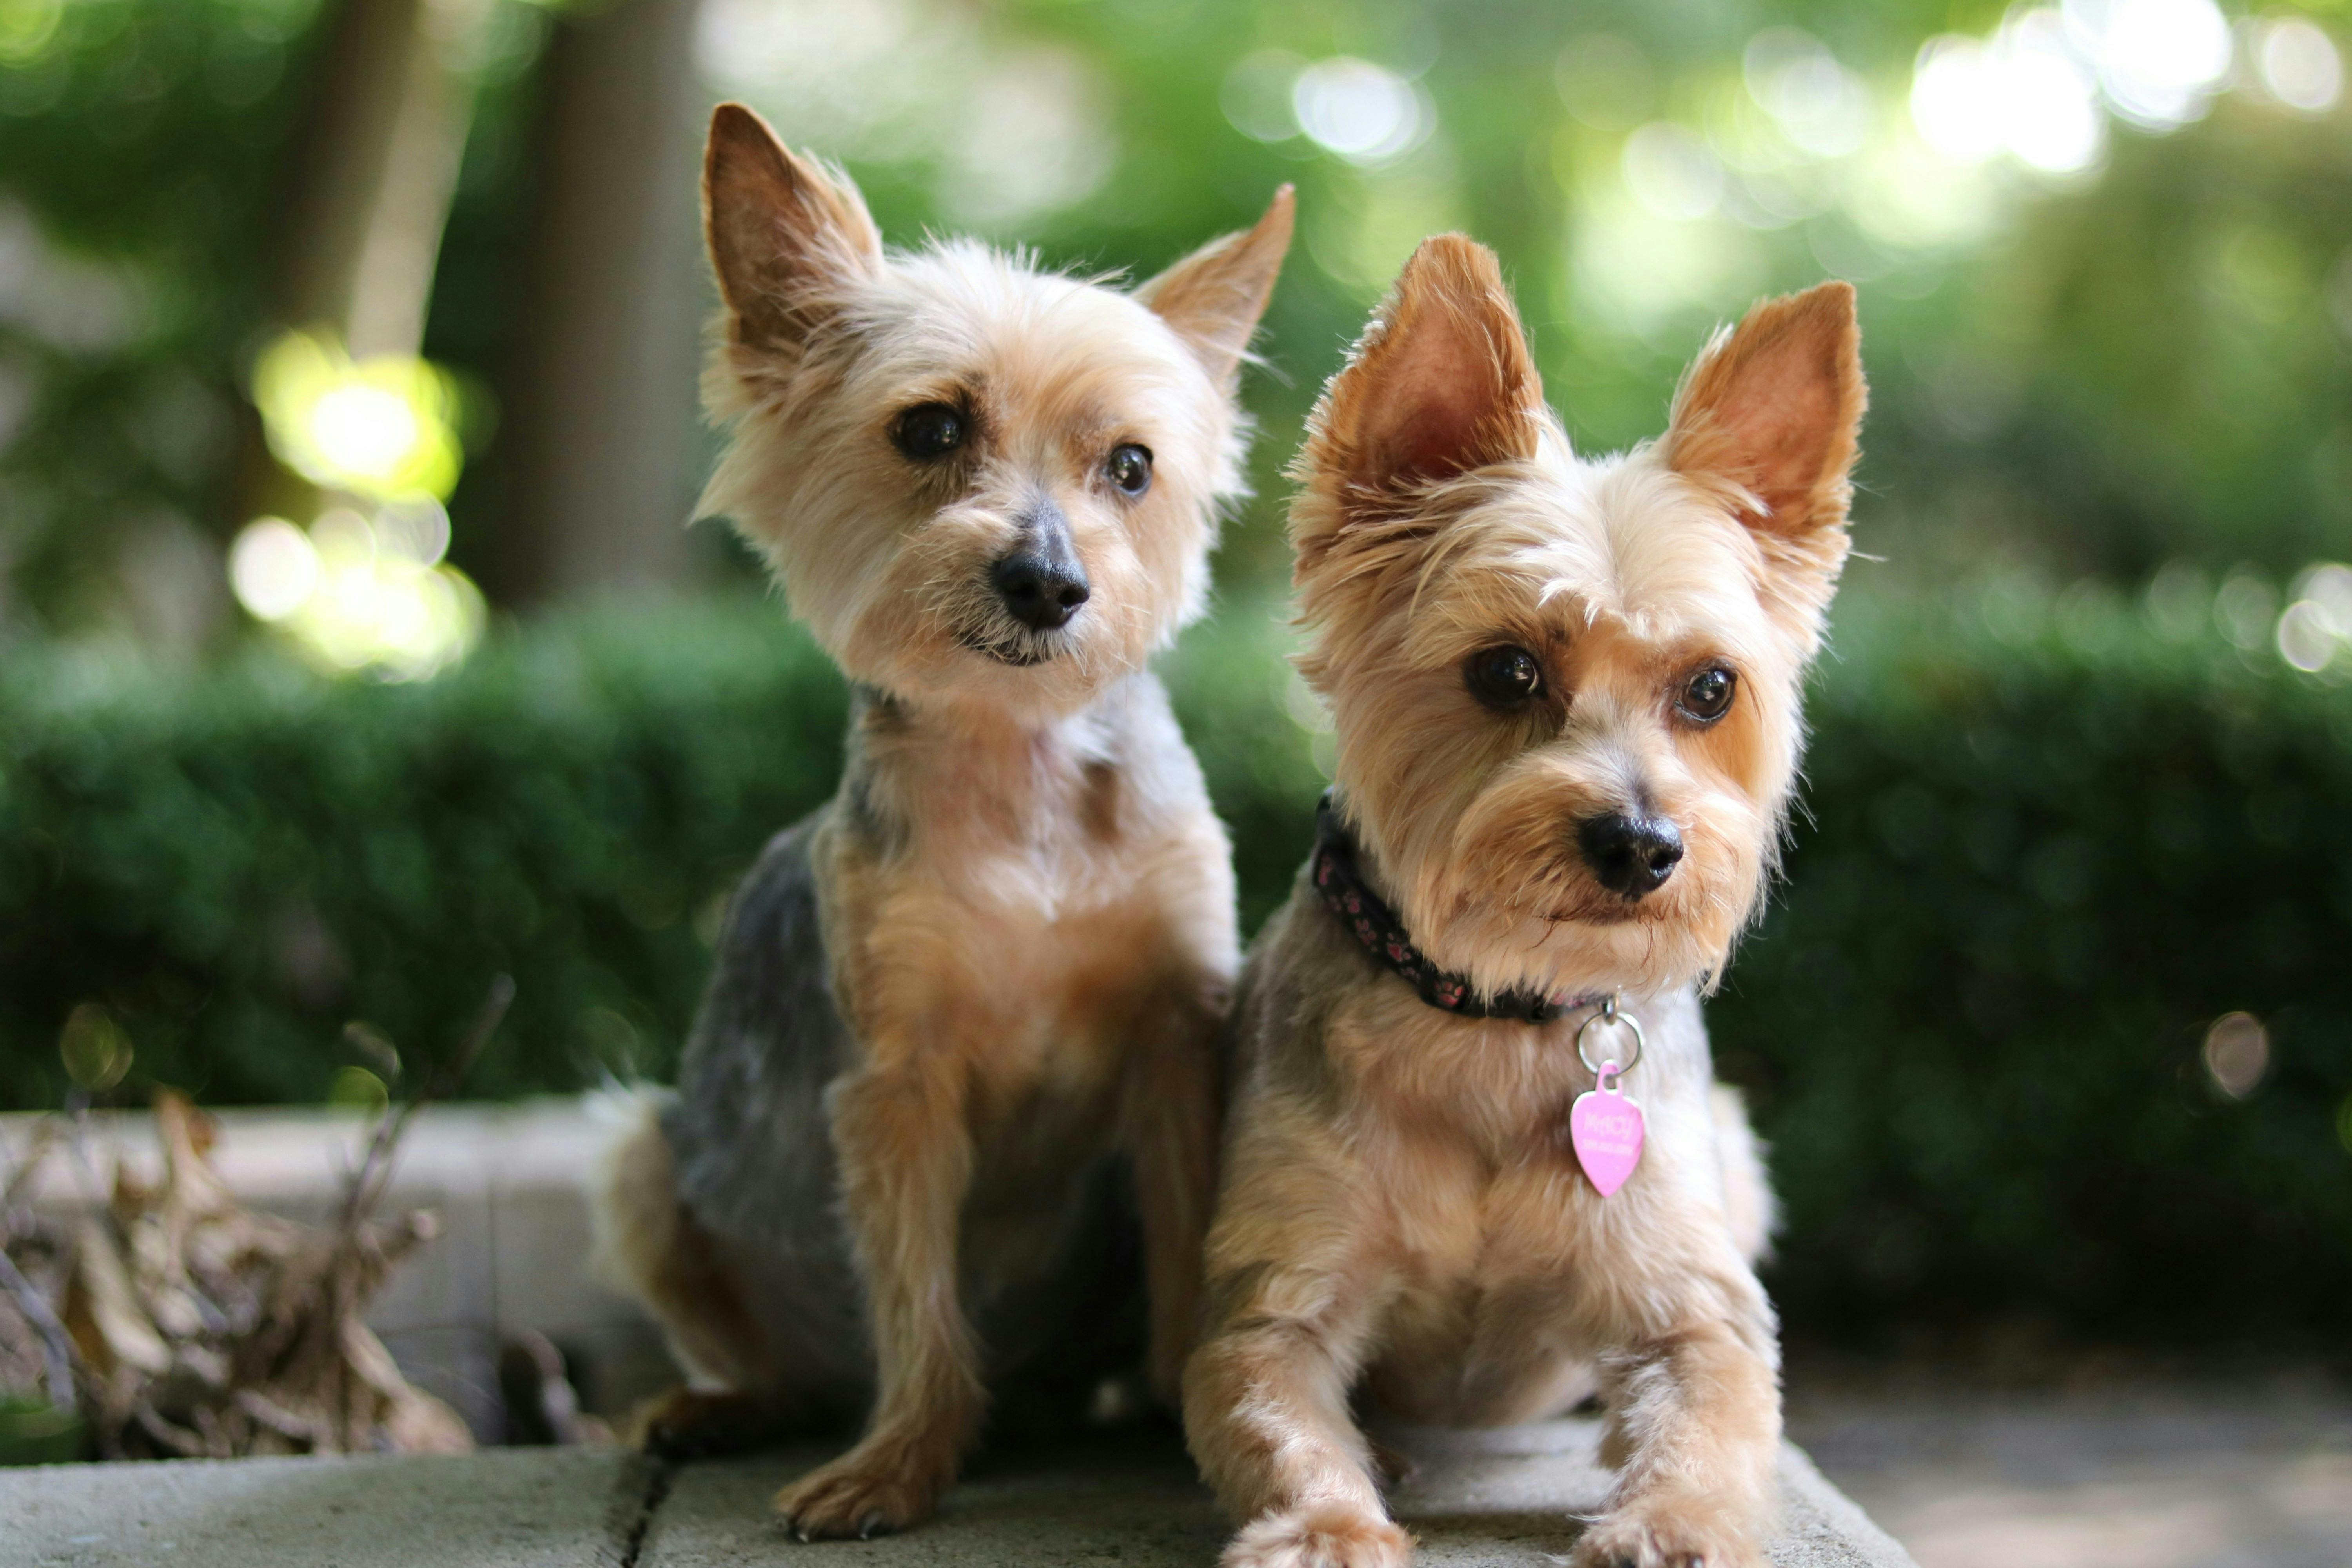 Two Yorkshire Terriers sitting outside.